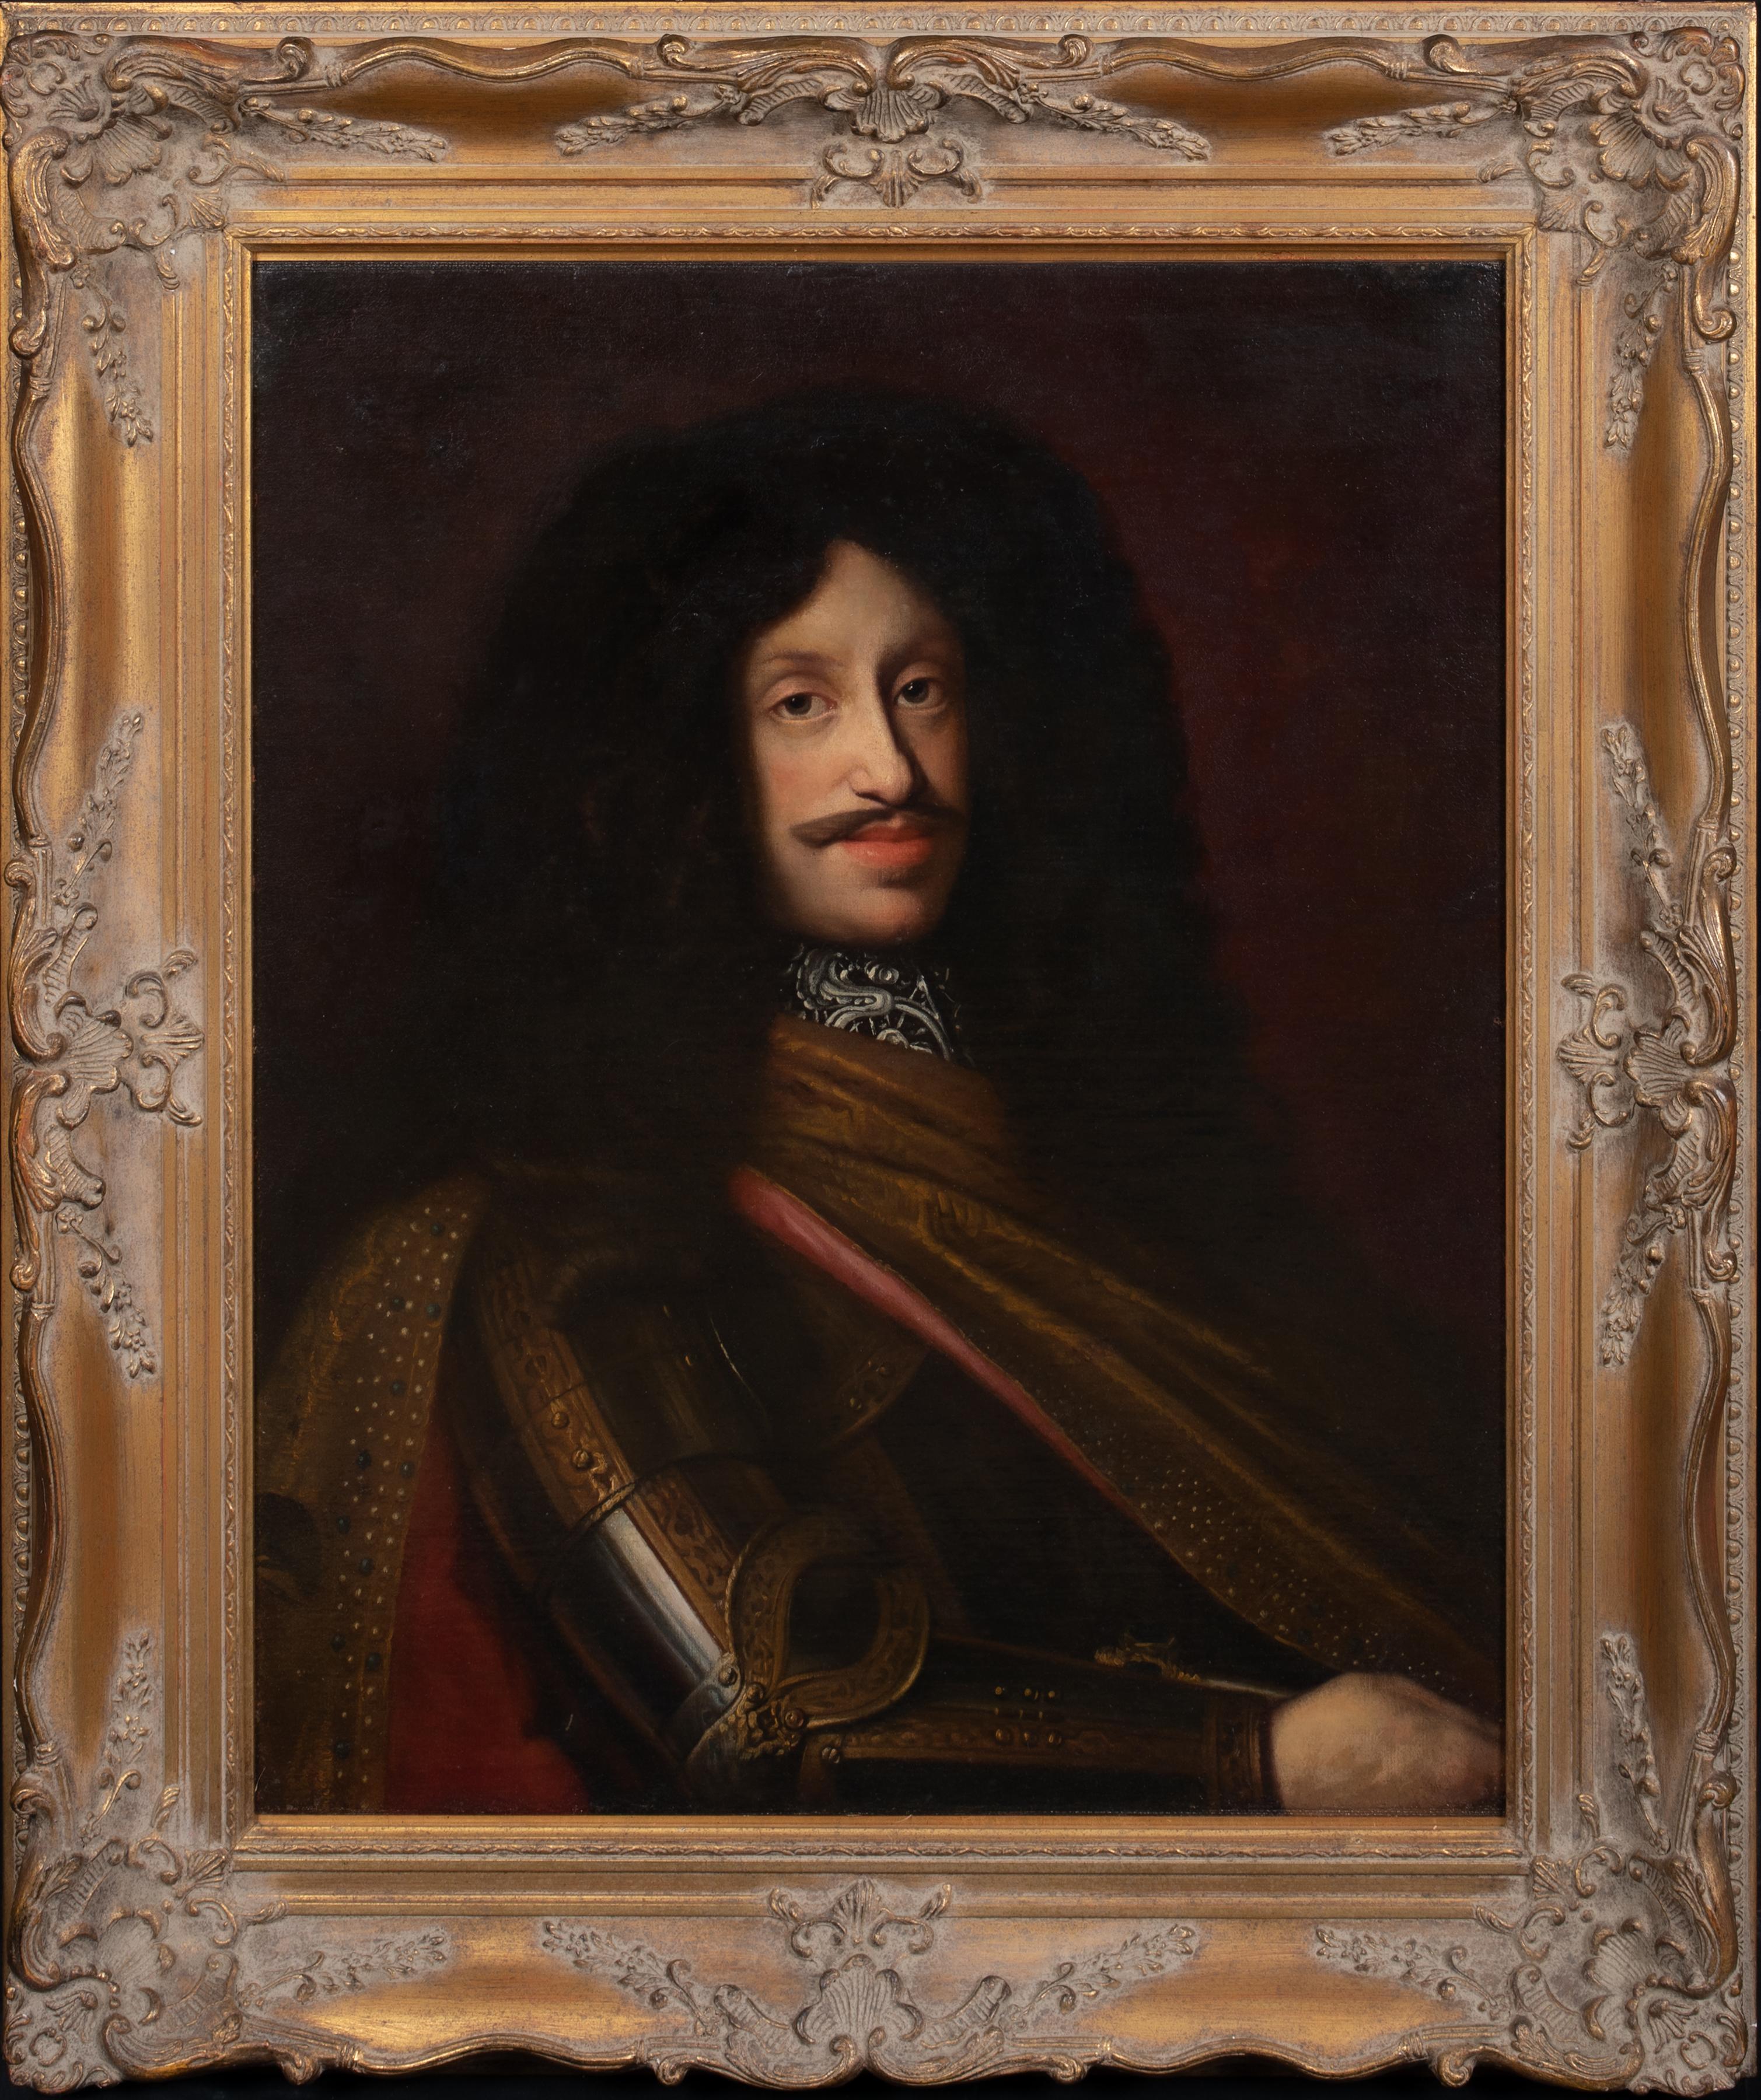 Unknown Portrait Painting - Portrait Of Holy Roman Emperor Leopold I (1640-1705) , 17th Century  